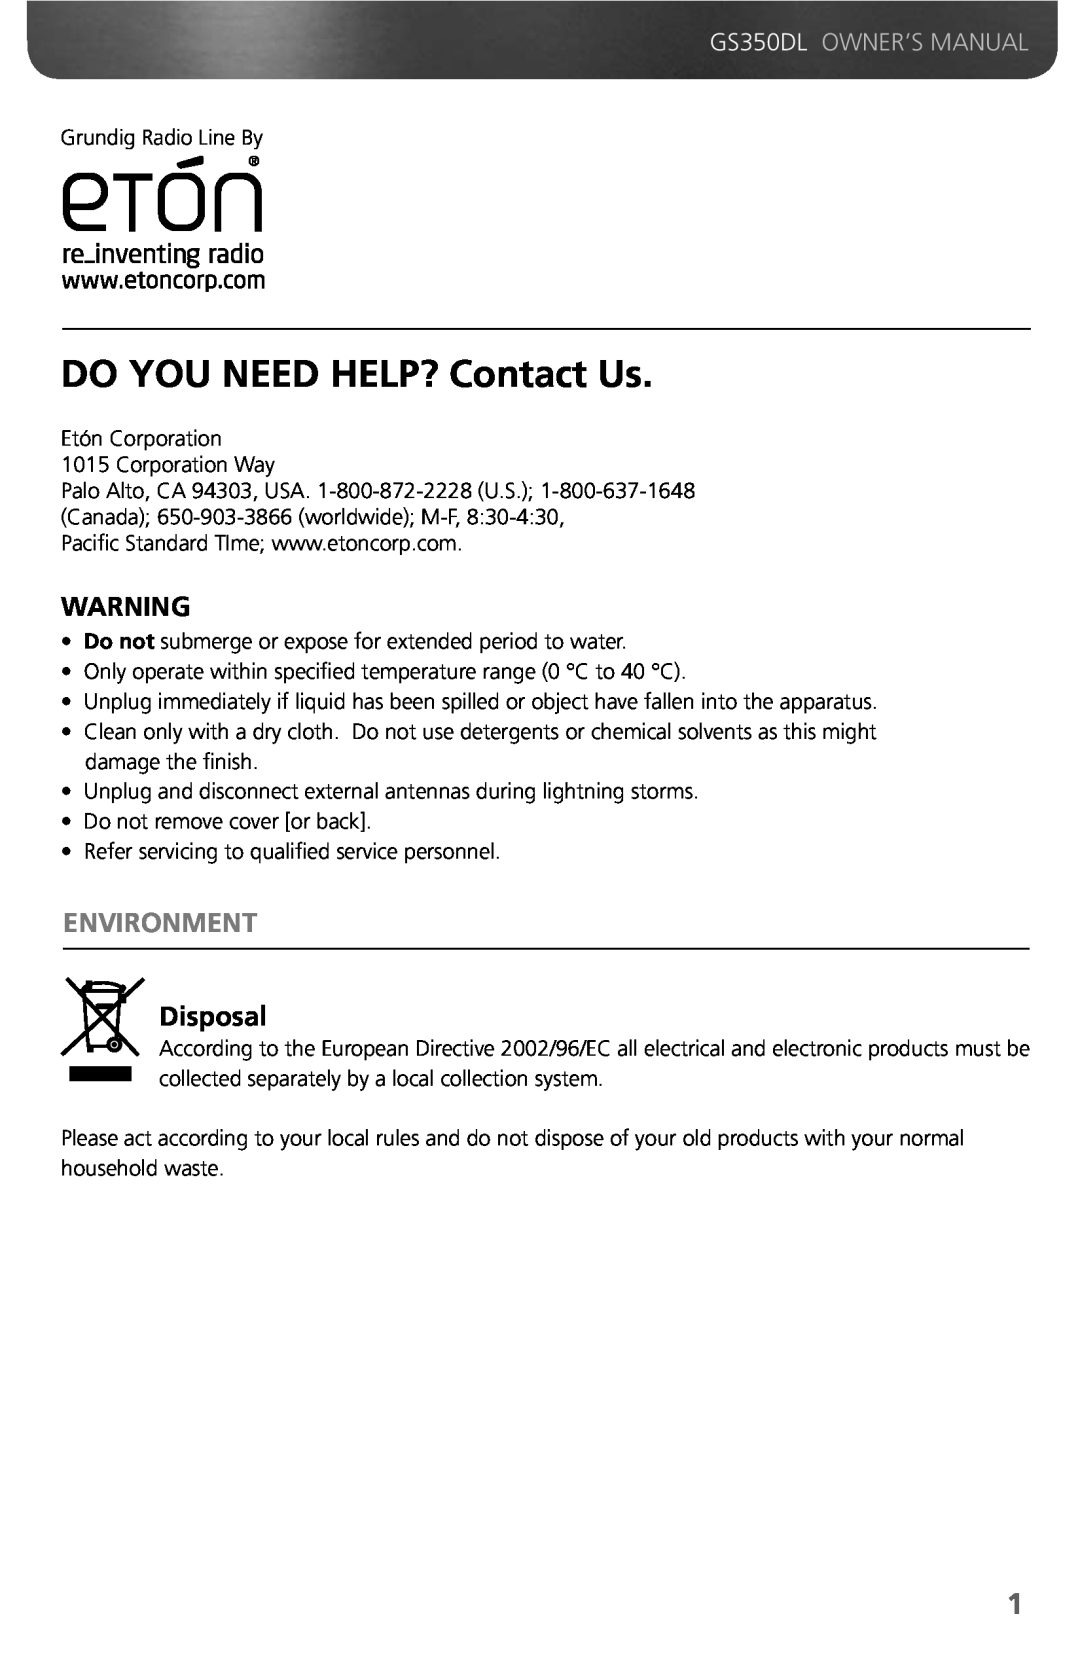 Grundig GS350DL owner manual Environment, DO YOU NEED HELP? Contact Us, Disposal 